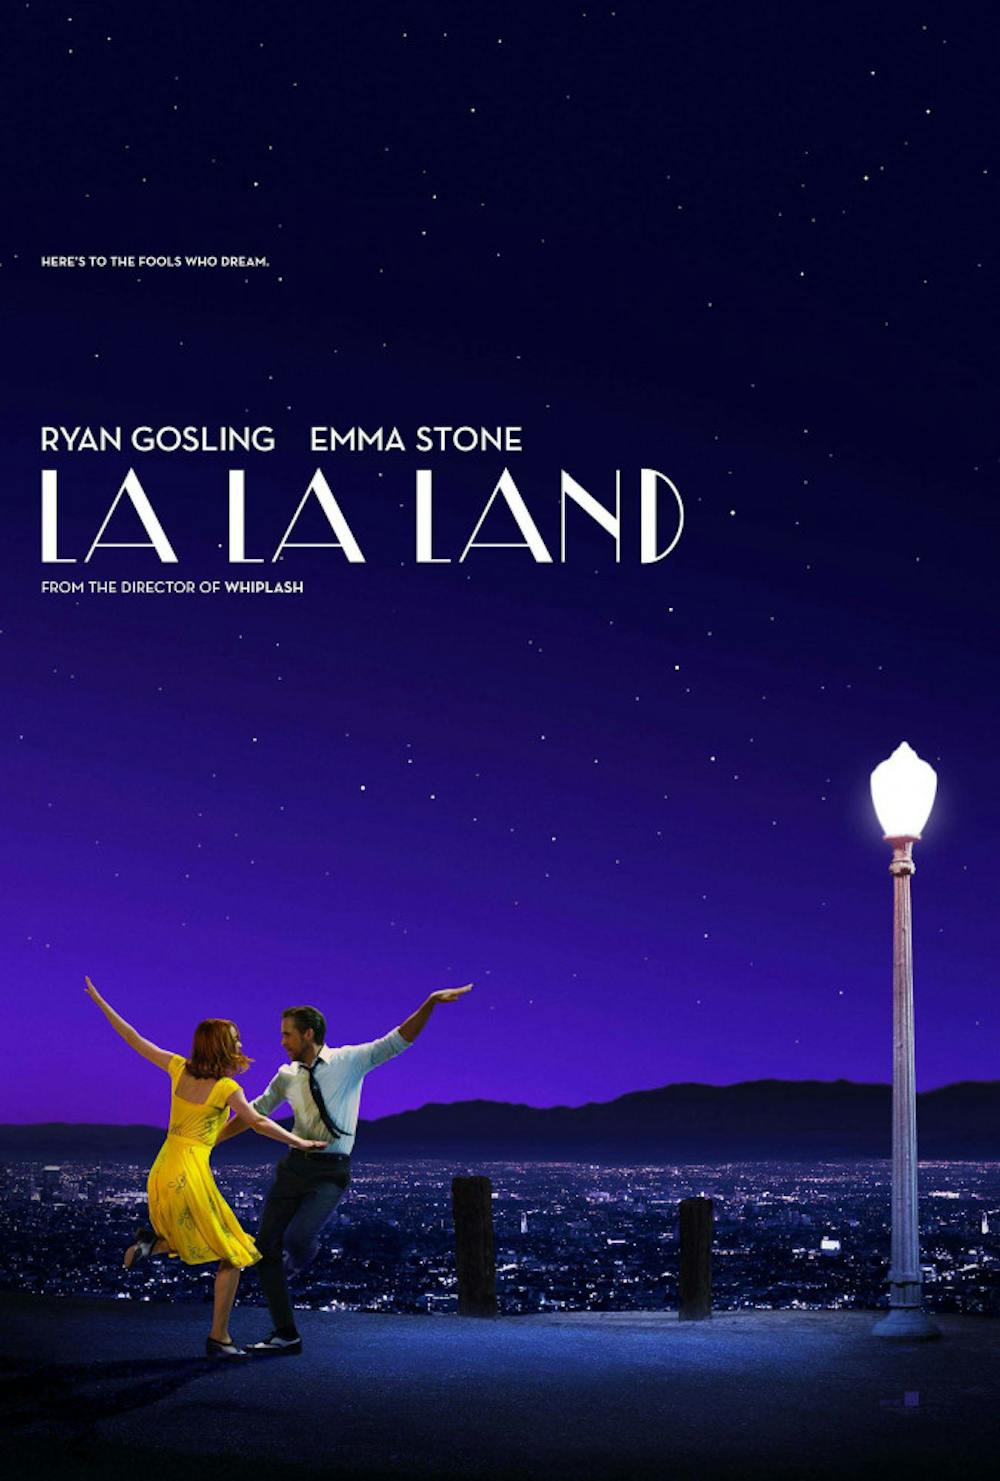 La La Land’s playful blend of old and new makes it obvious why the film has achieved critical acclaim. 